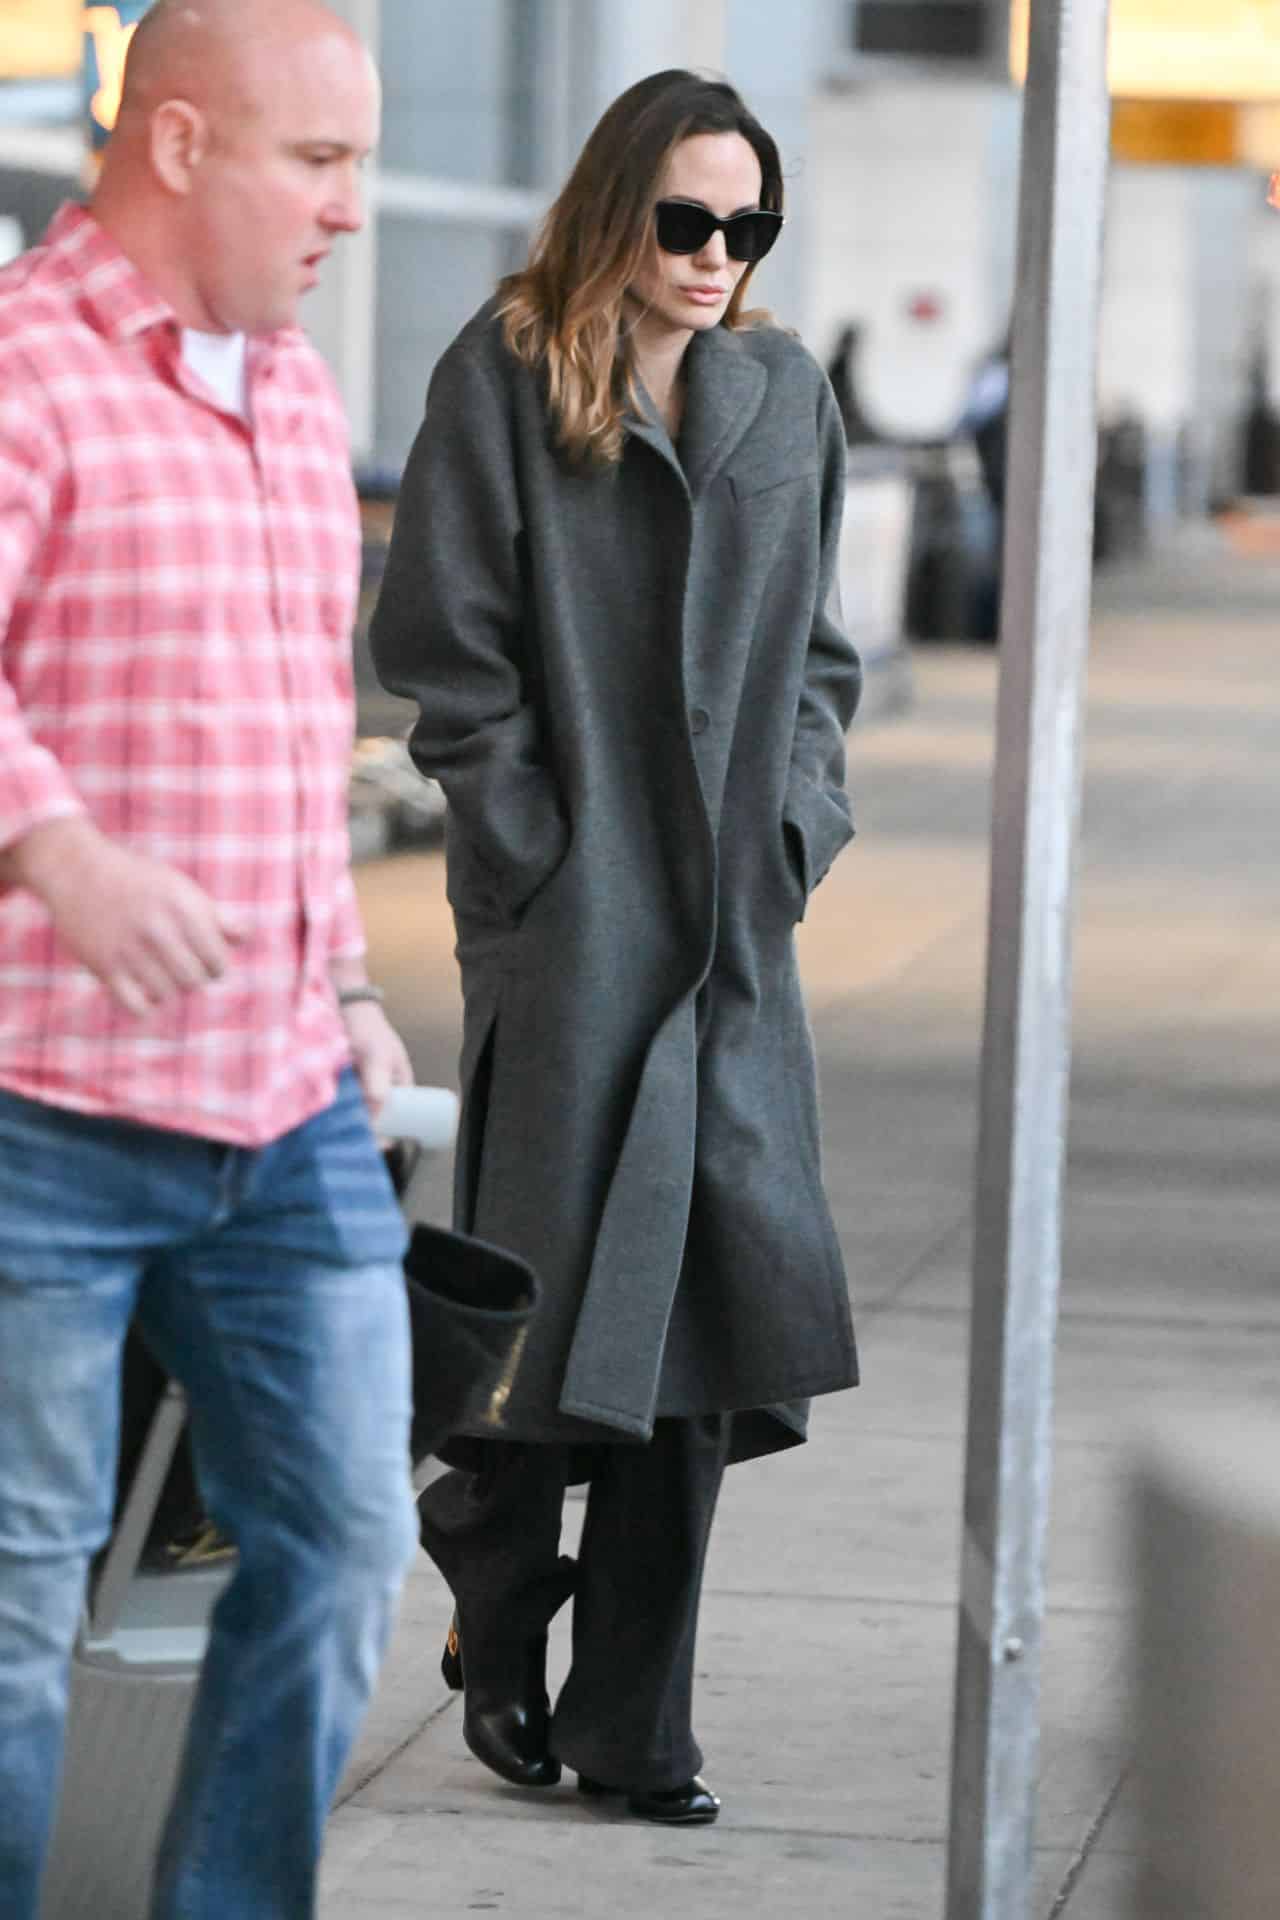 Angelina Jolie Nails the Chic Travel Look in Grey Wool Coat